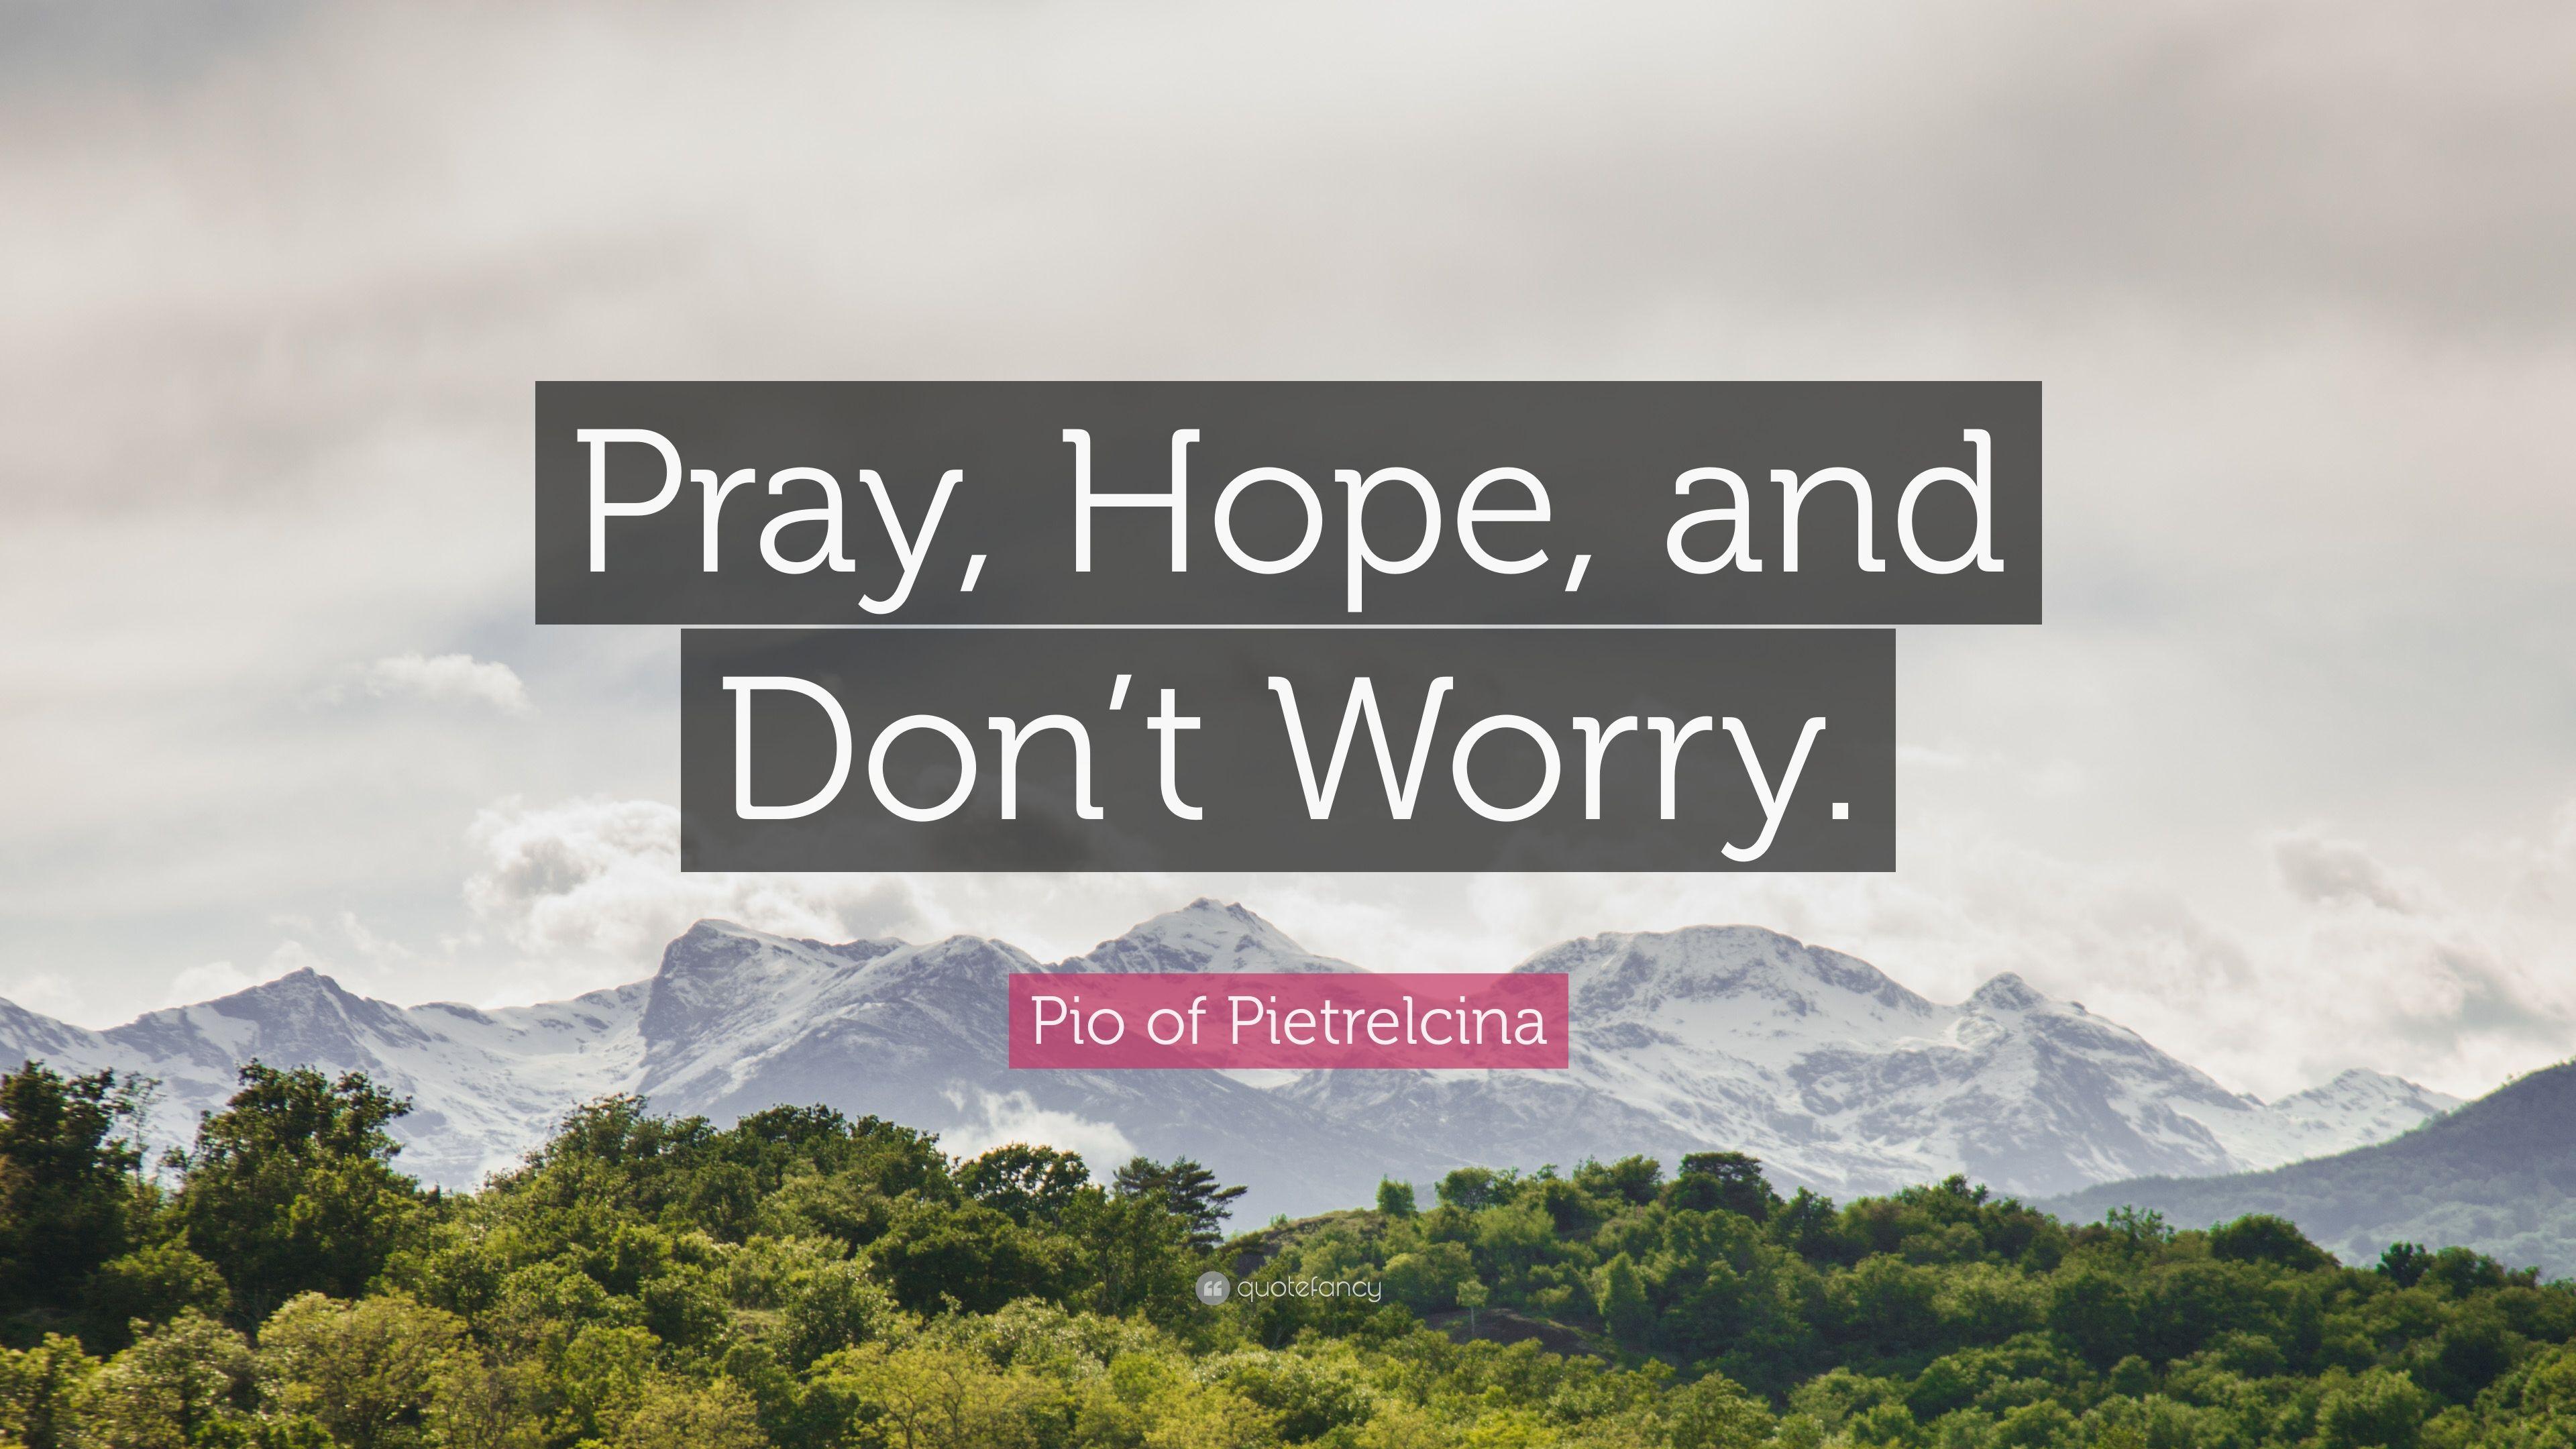 Pio of Pietrelcina Quote: “Pray, Hope, and Don't Worry.” 12